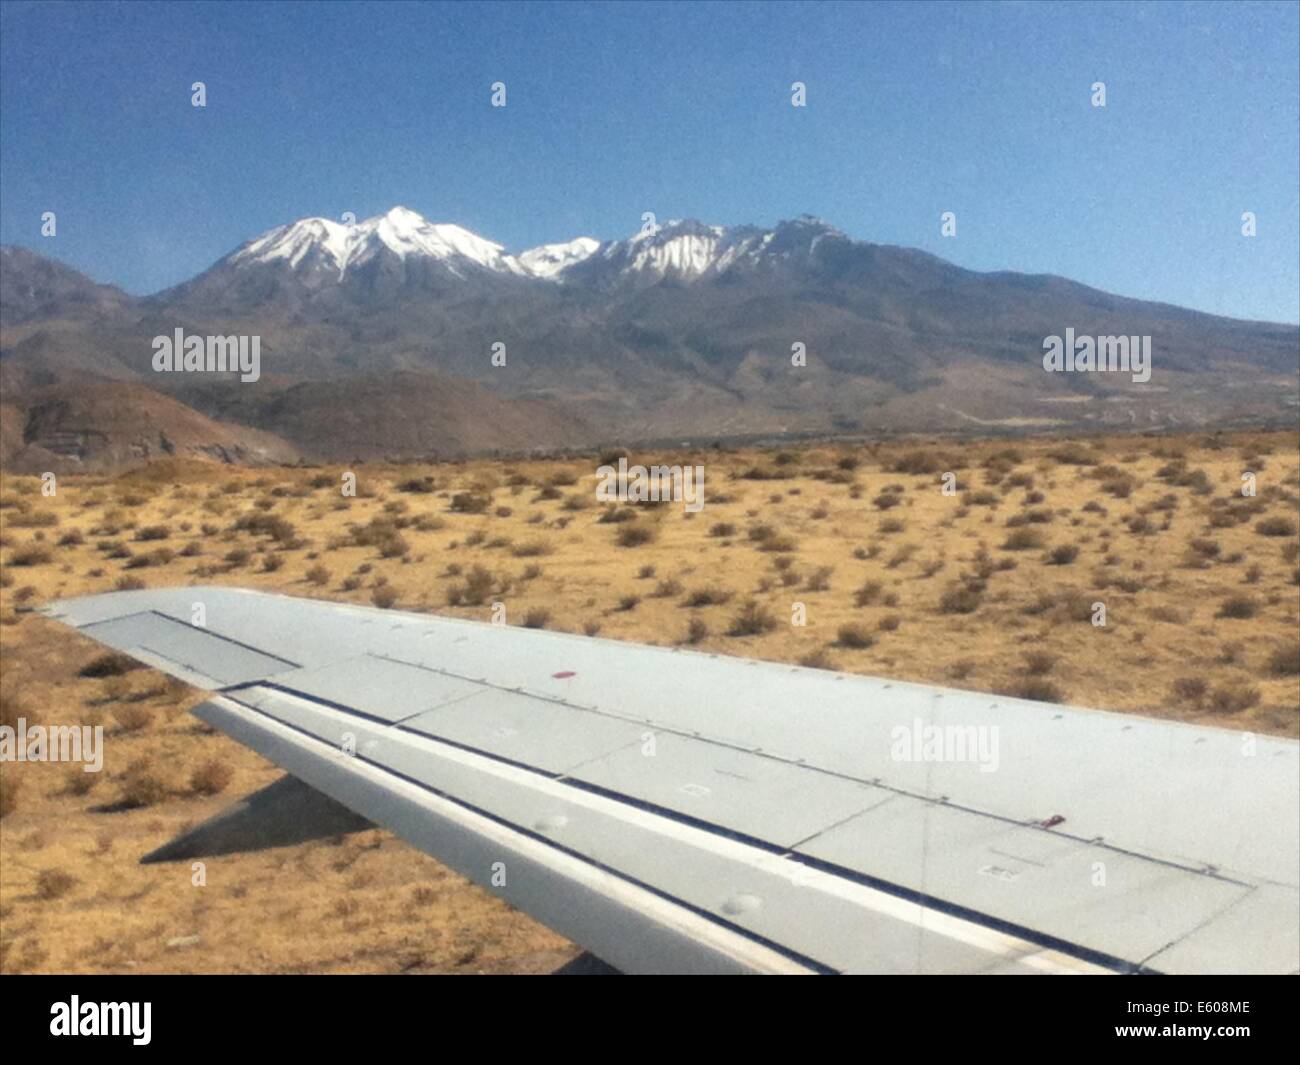 The snow capped peaks of Chachani mountain, as seen from the runway of Arequipa airport, Peru Stock Photo